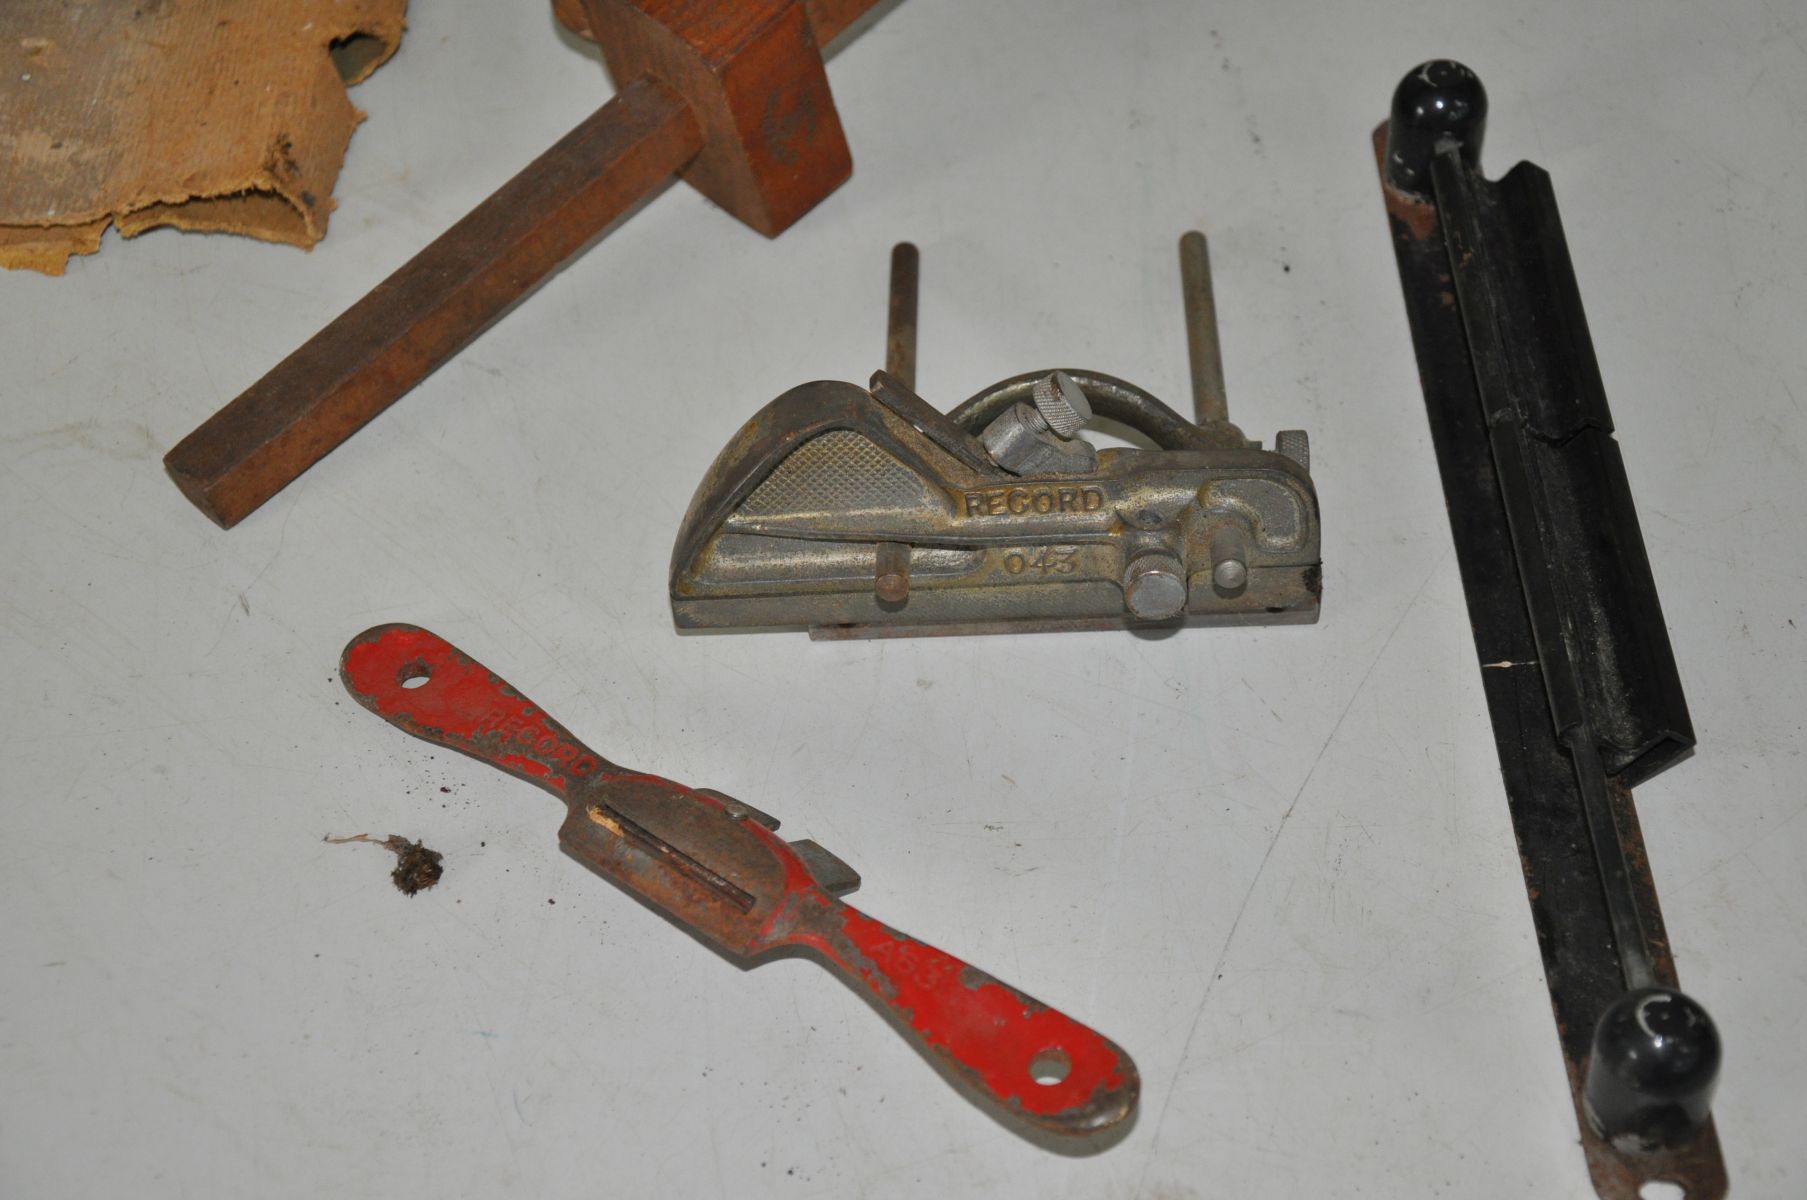 A COLLECTION OF VINTAGE TOOLS, IRONS, CASTERS ETC, including a Record No 043 gauge, a Spongs Bean - Image 2 of 6